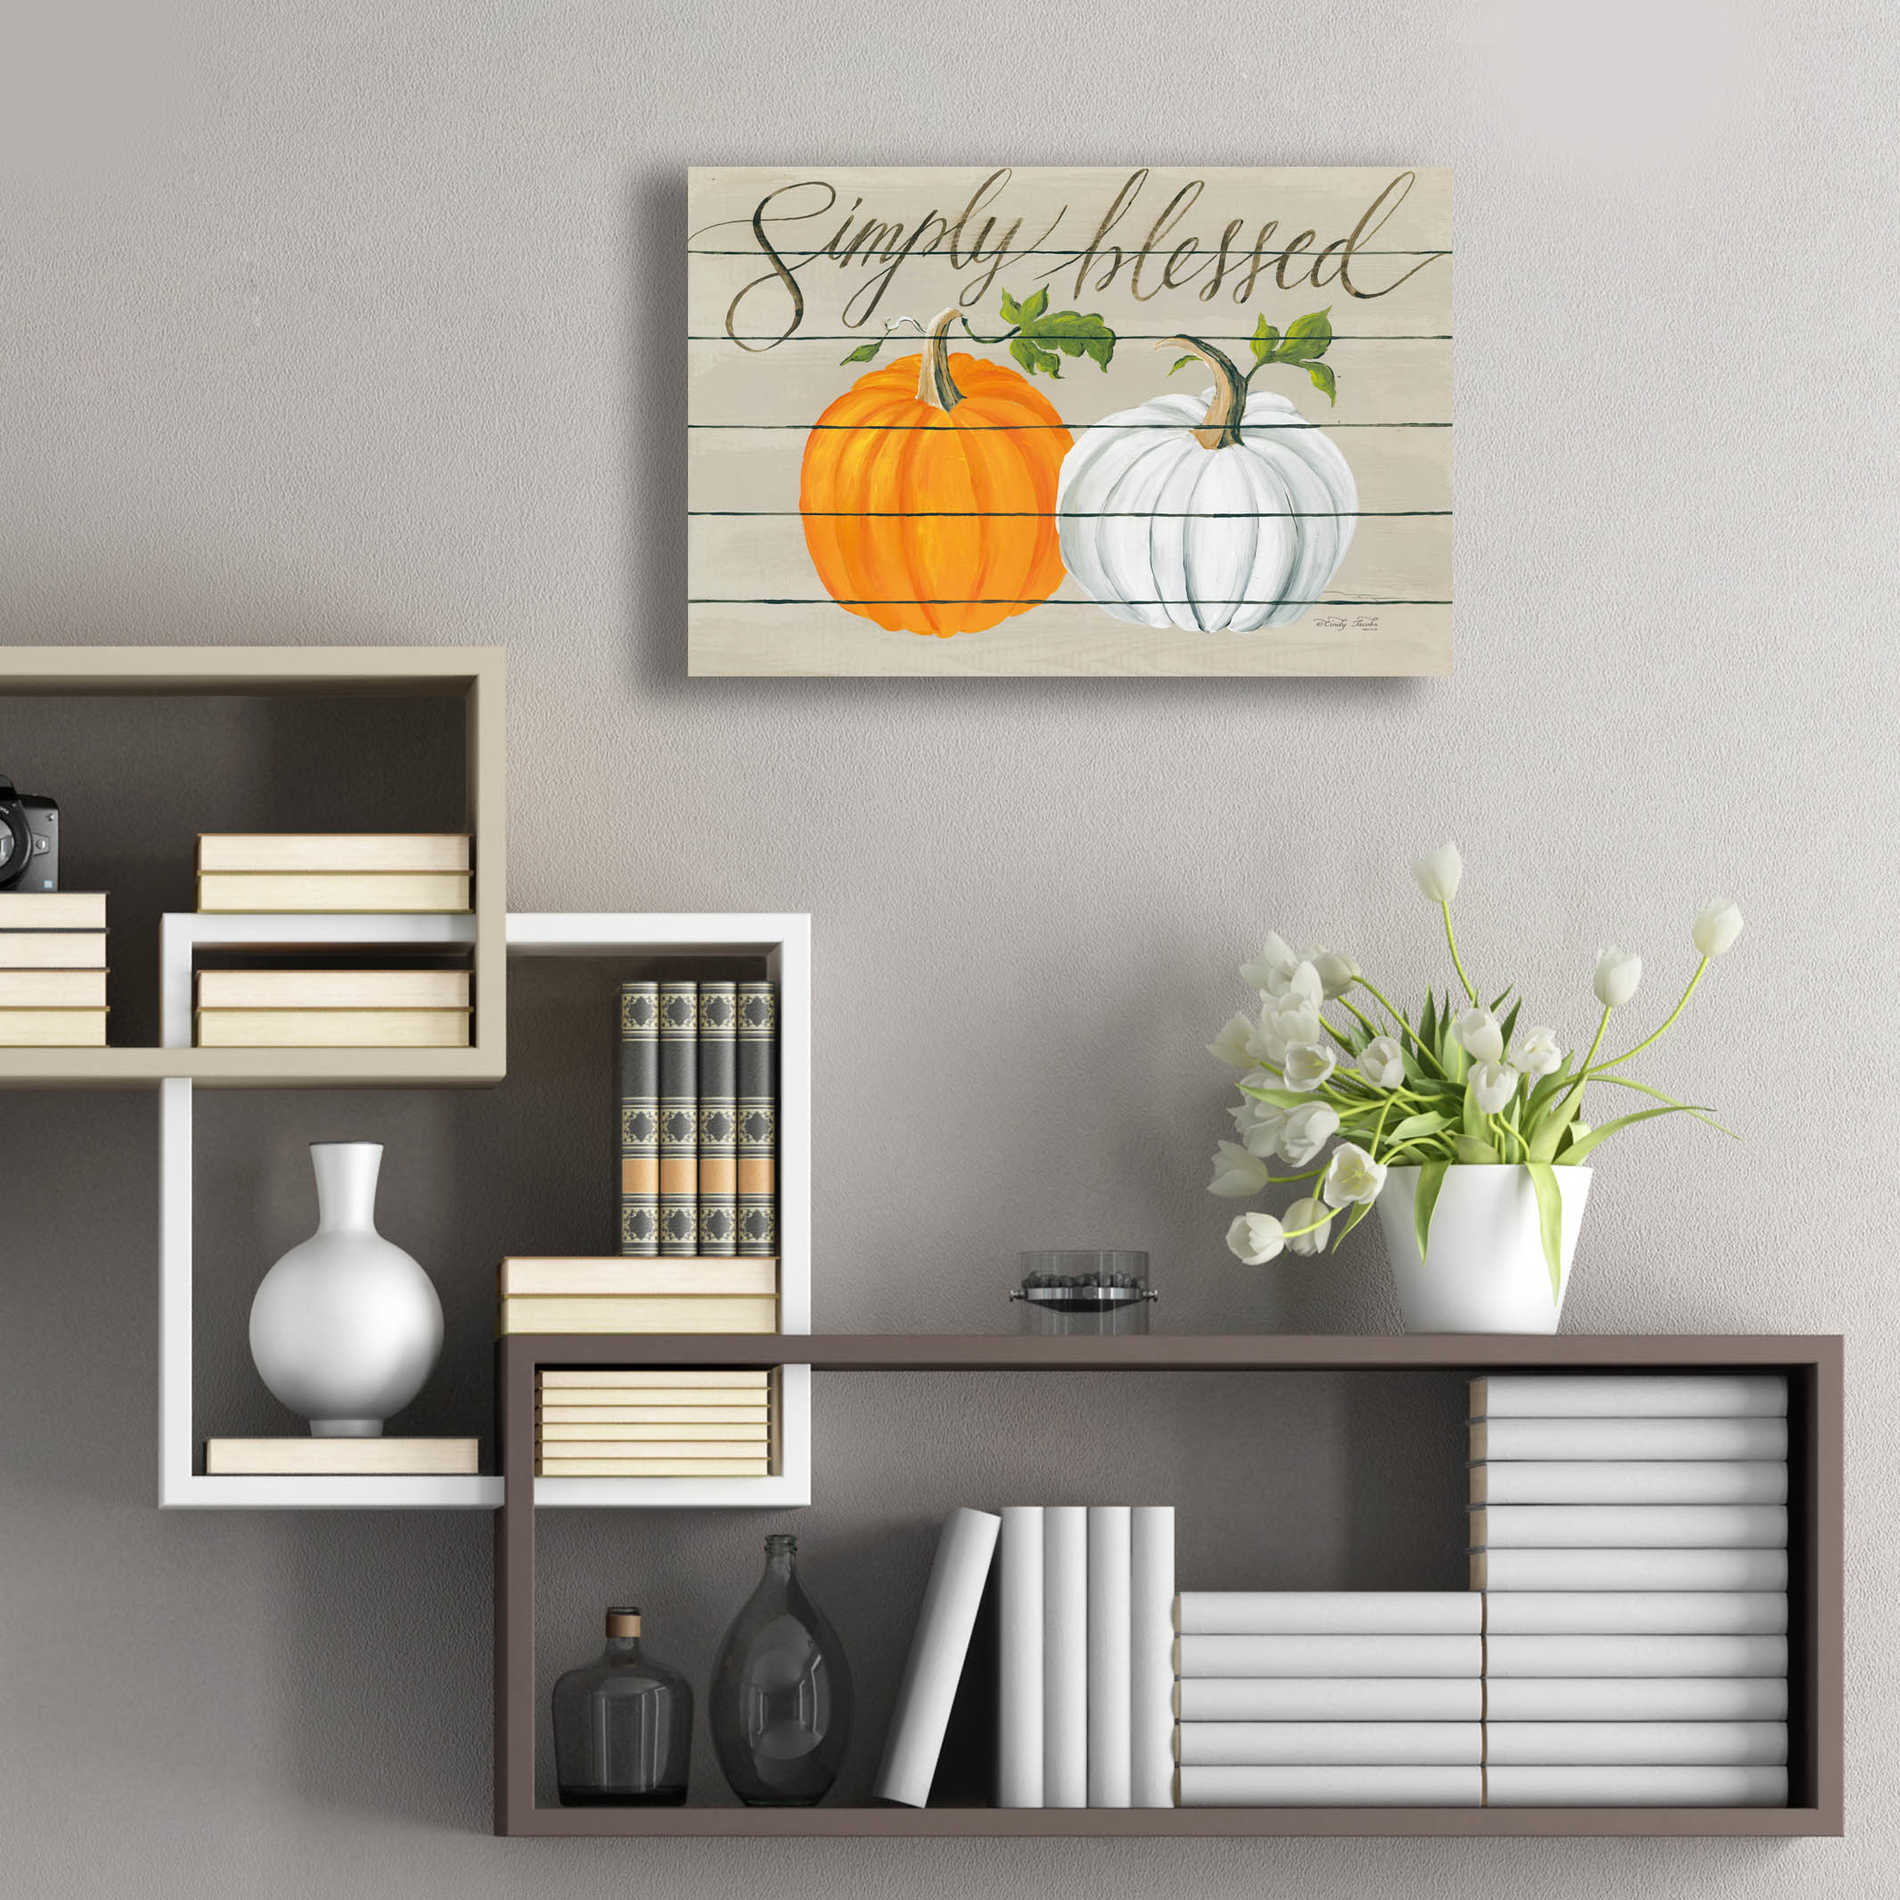 Epic Art 'Simply Blessed Pumpkins' by Cindy Jacobs, Acrylic Glass Wall Art,24x16